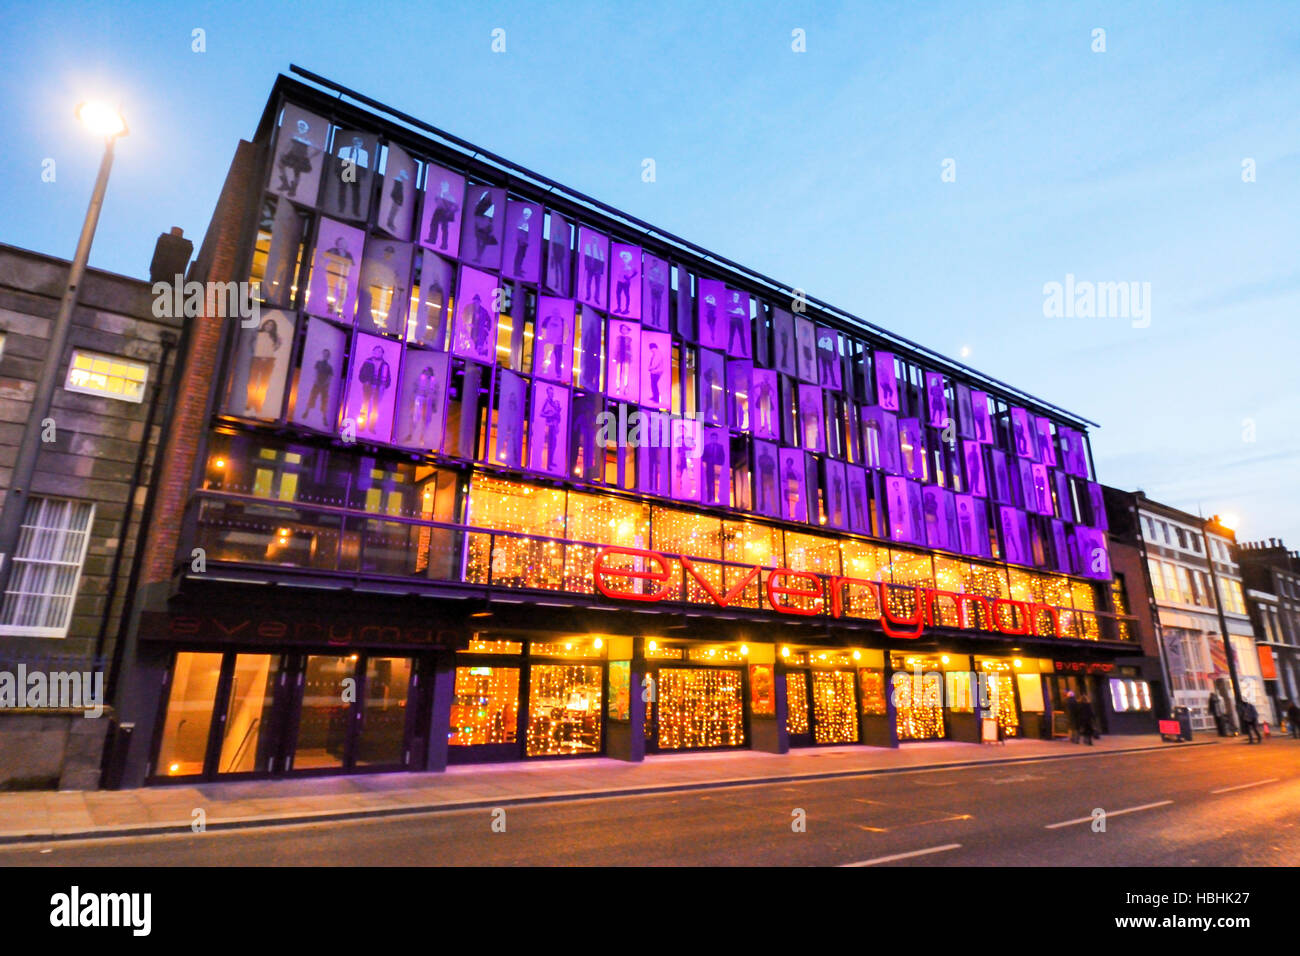 The refurbished Everyman Theatre on Hope Street in Liverpool. Stock Photo